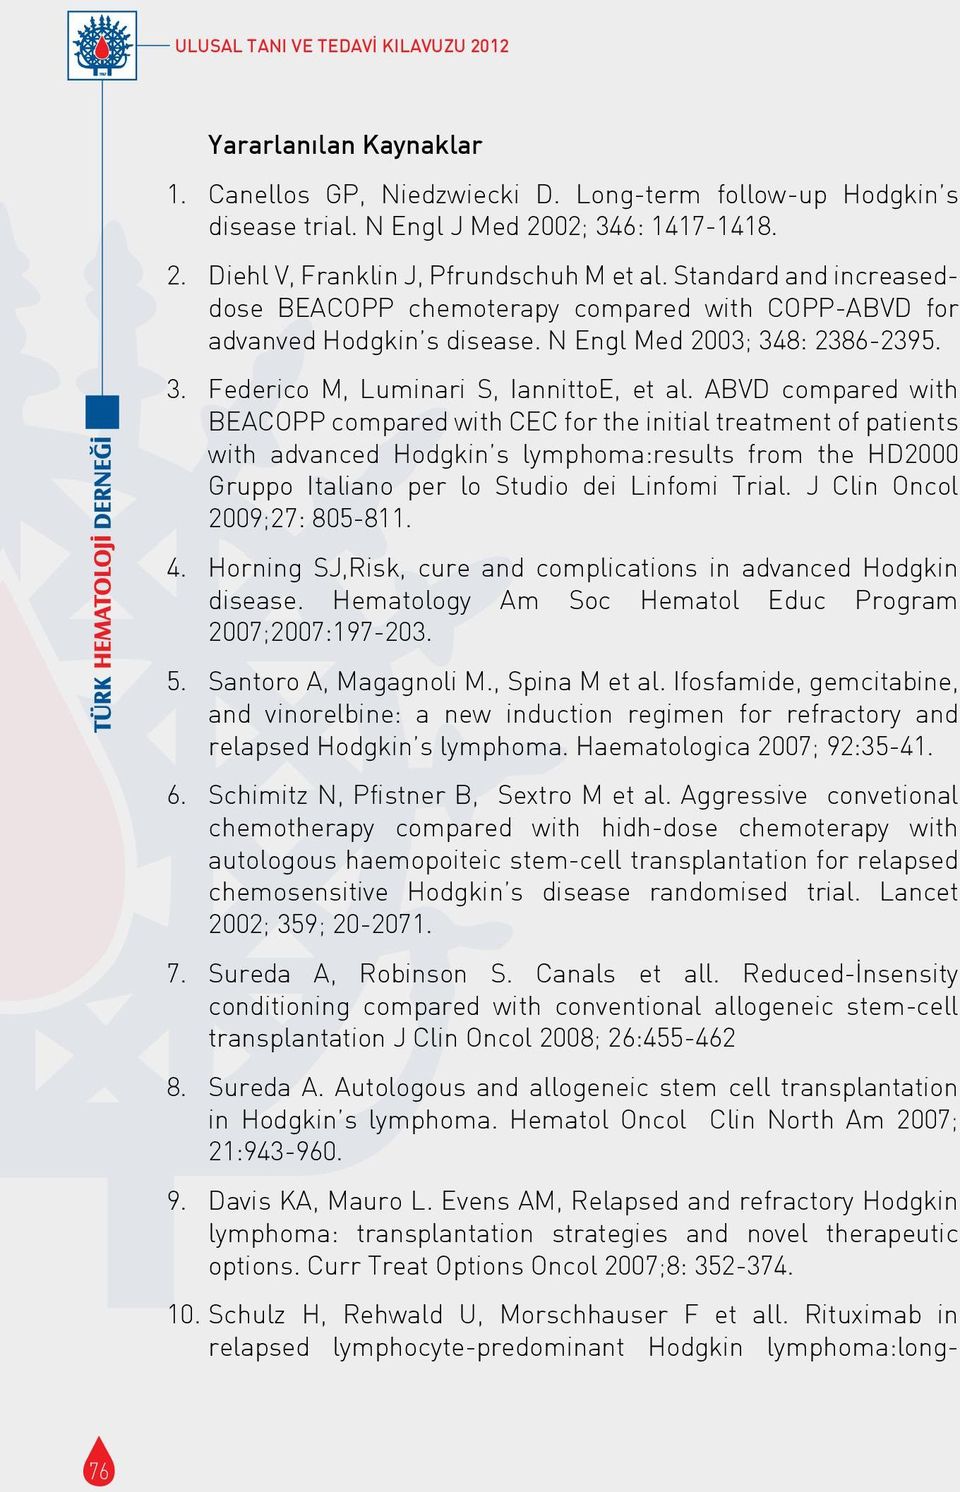 ABVD compared with BEACOPP compared with CEC for the initial treatment of patients with advanced Hodgkin s lymphoma:results from the HD2000 Gruppo Italiano per lo Studio dei Linfomi Trial.